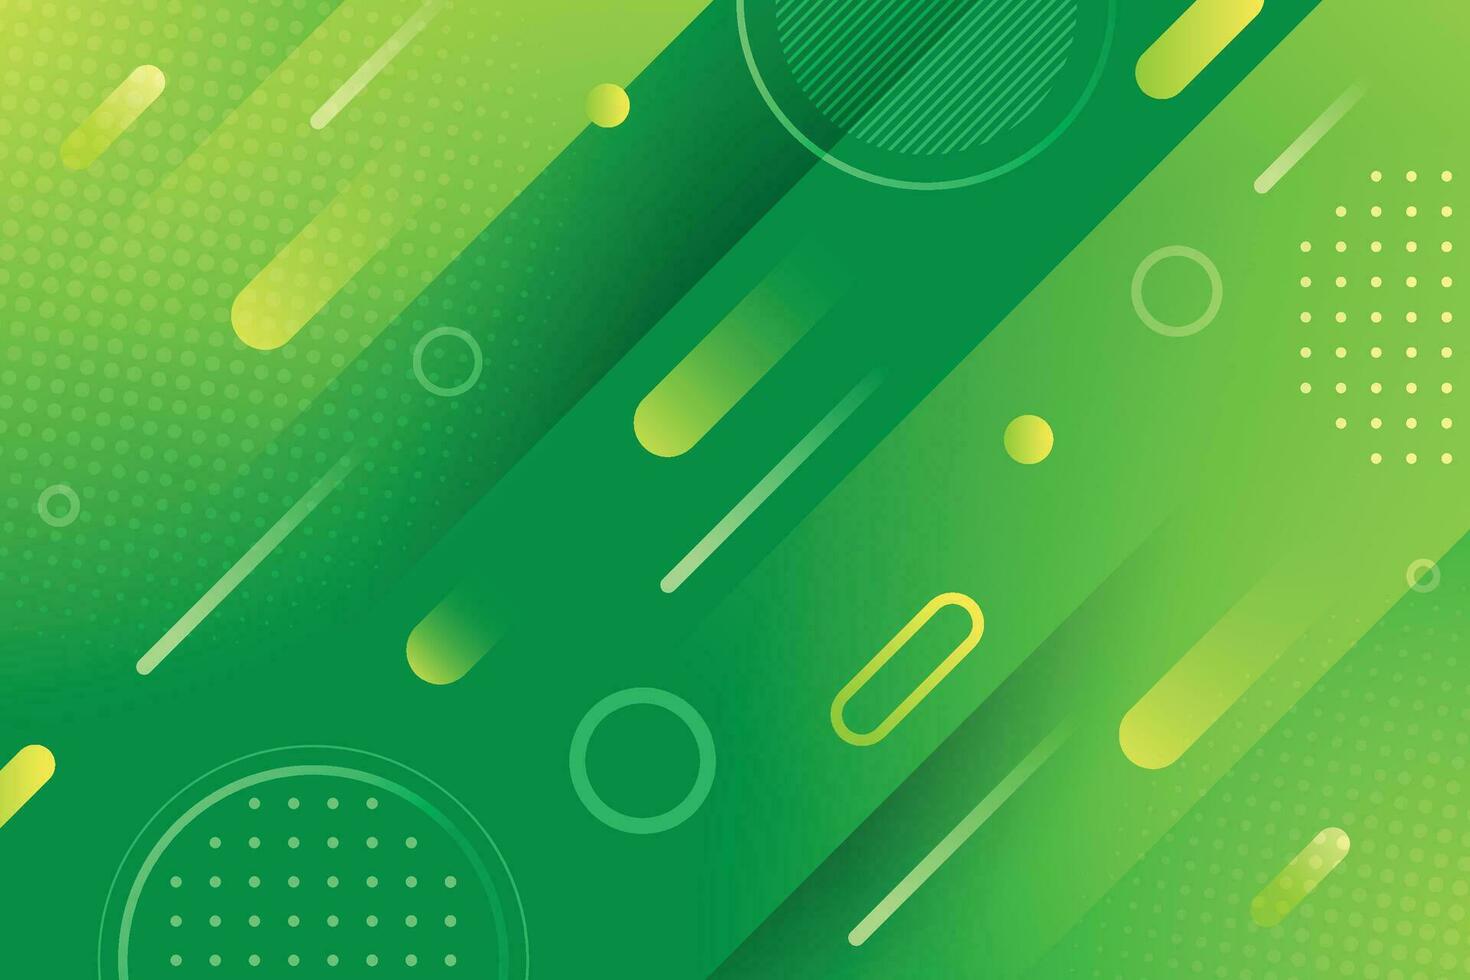 Green and yellow abstract background with circles and lines vector